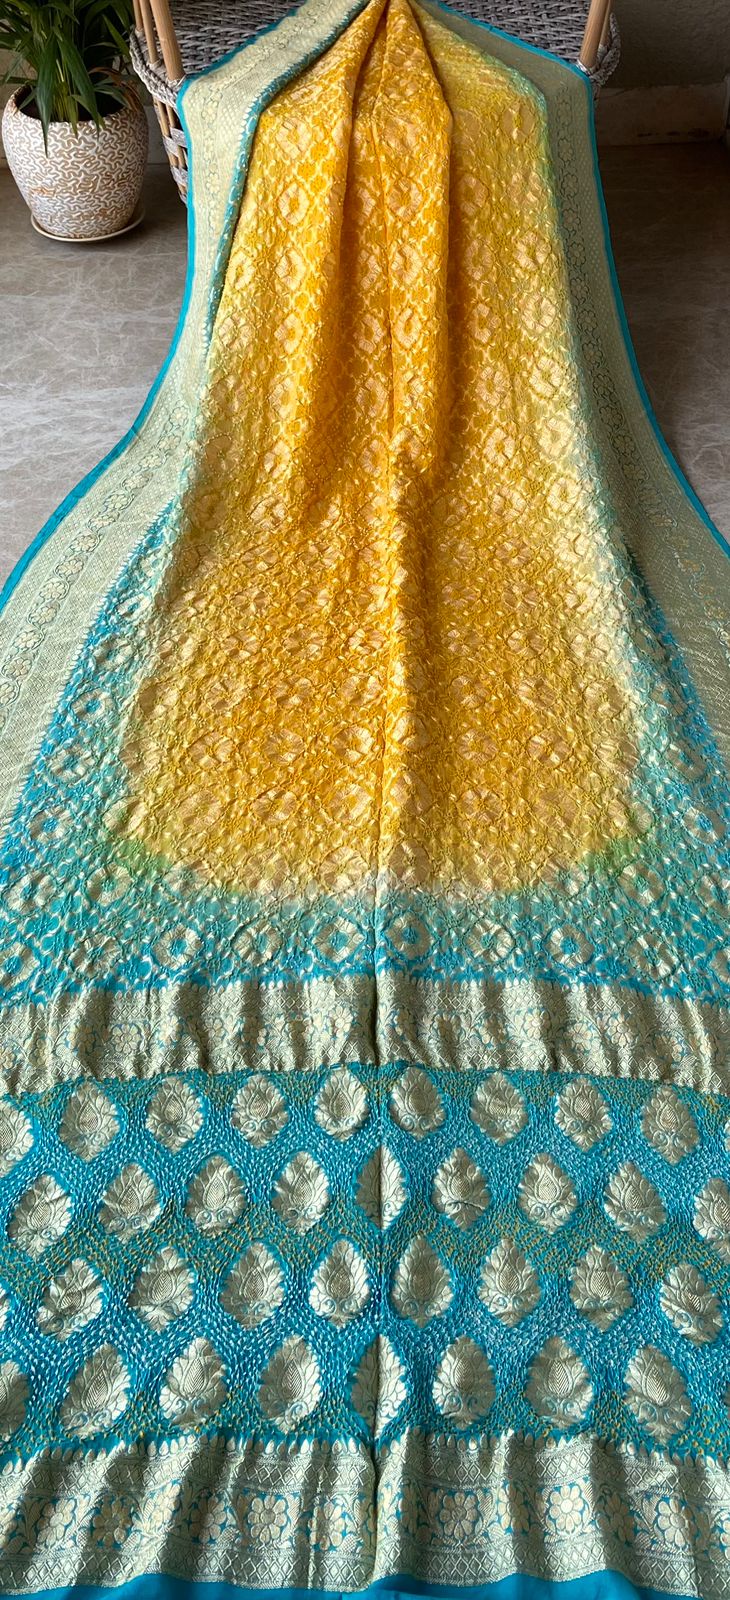 Garima - A Blessing from Heaven Saree